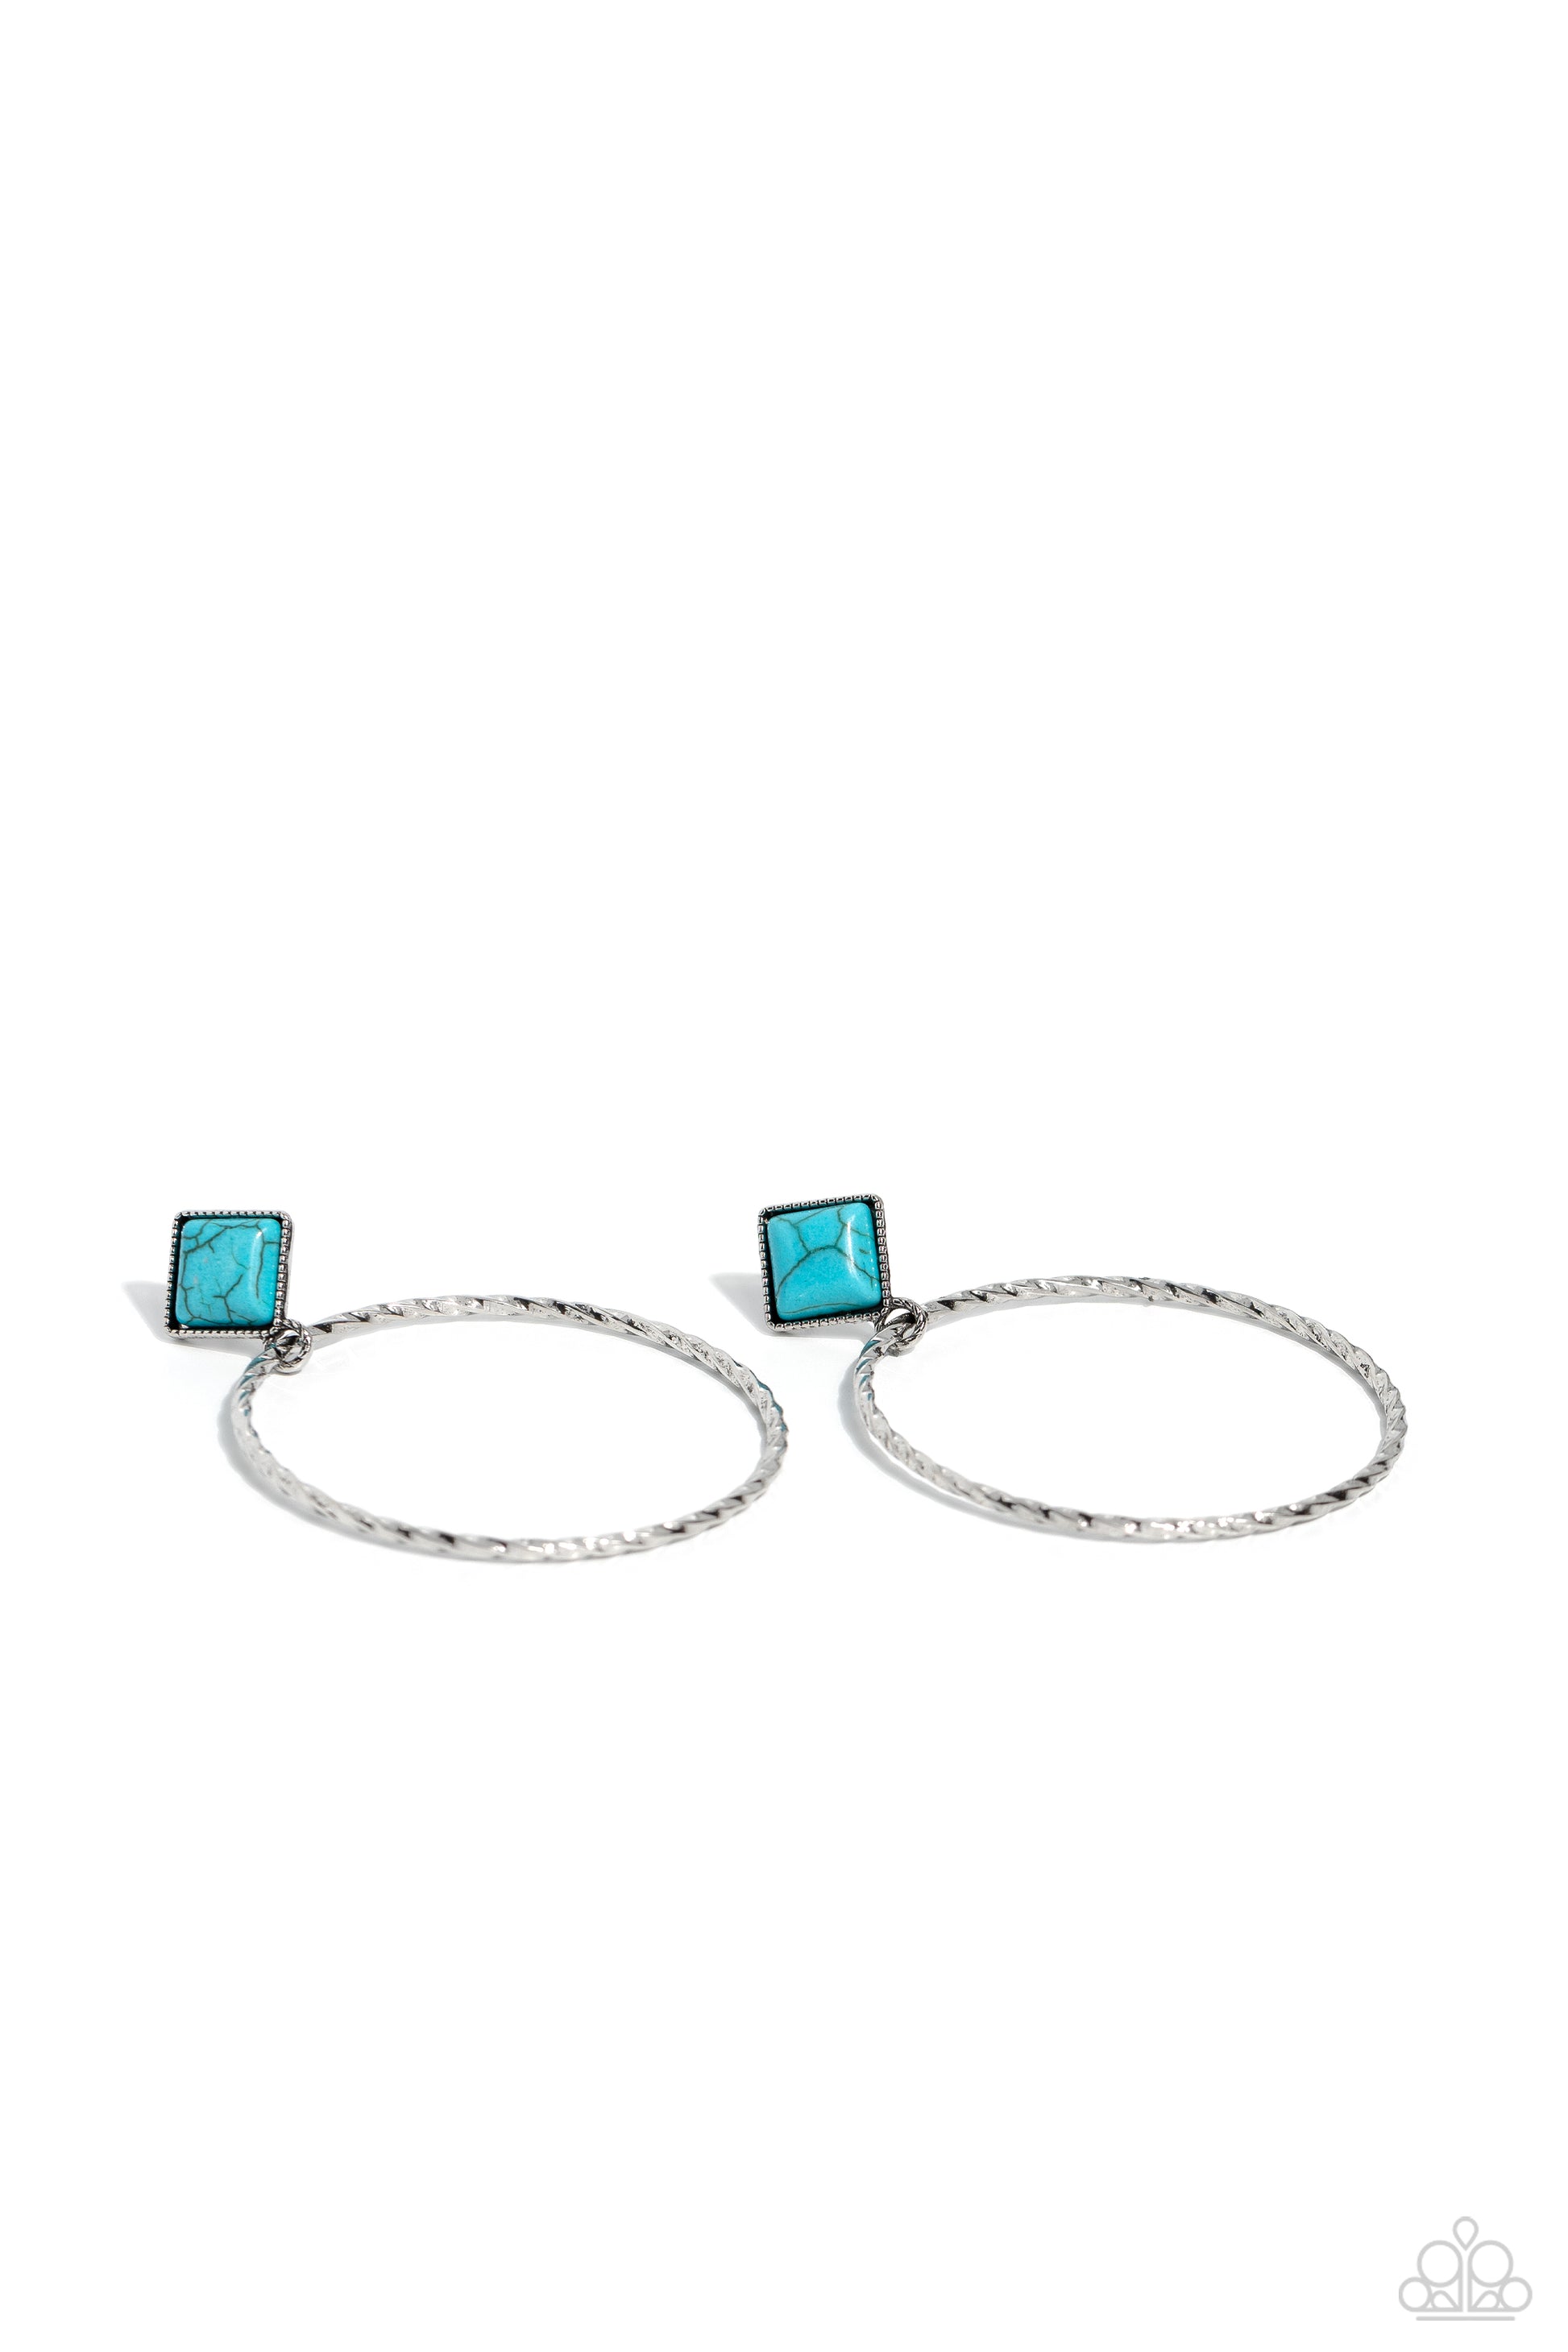 Canyon Circlet Turquoise Post Earring - Paparazzi Accessories  A twisted and textured silver oversized hoop, swings from the bottom of a silver-studded square frame, tilted on its point, with a refreshing turquoise stone pressed in its center. The two rustic pieces cascade down the ear for a free-spirited finish, with eye-catching movement. Earring attaches to a standard post fitting. As the stone elements in this piece are natural, some color variation is normal. P5PO-BLXX-149XX